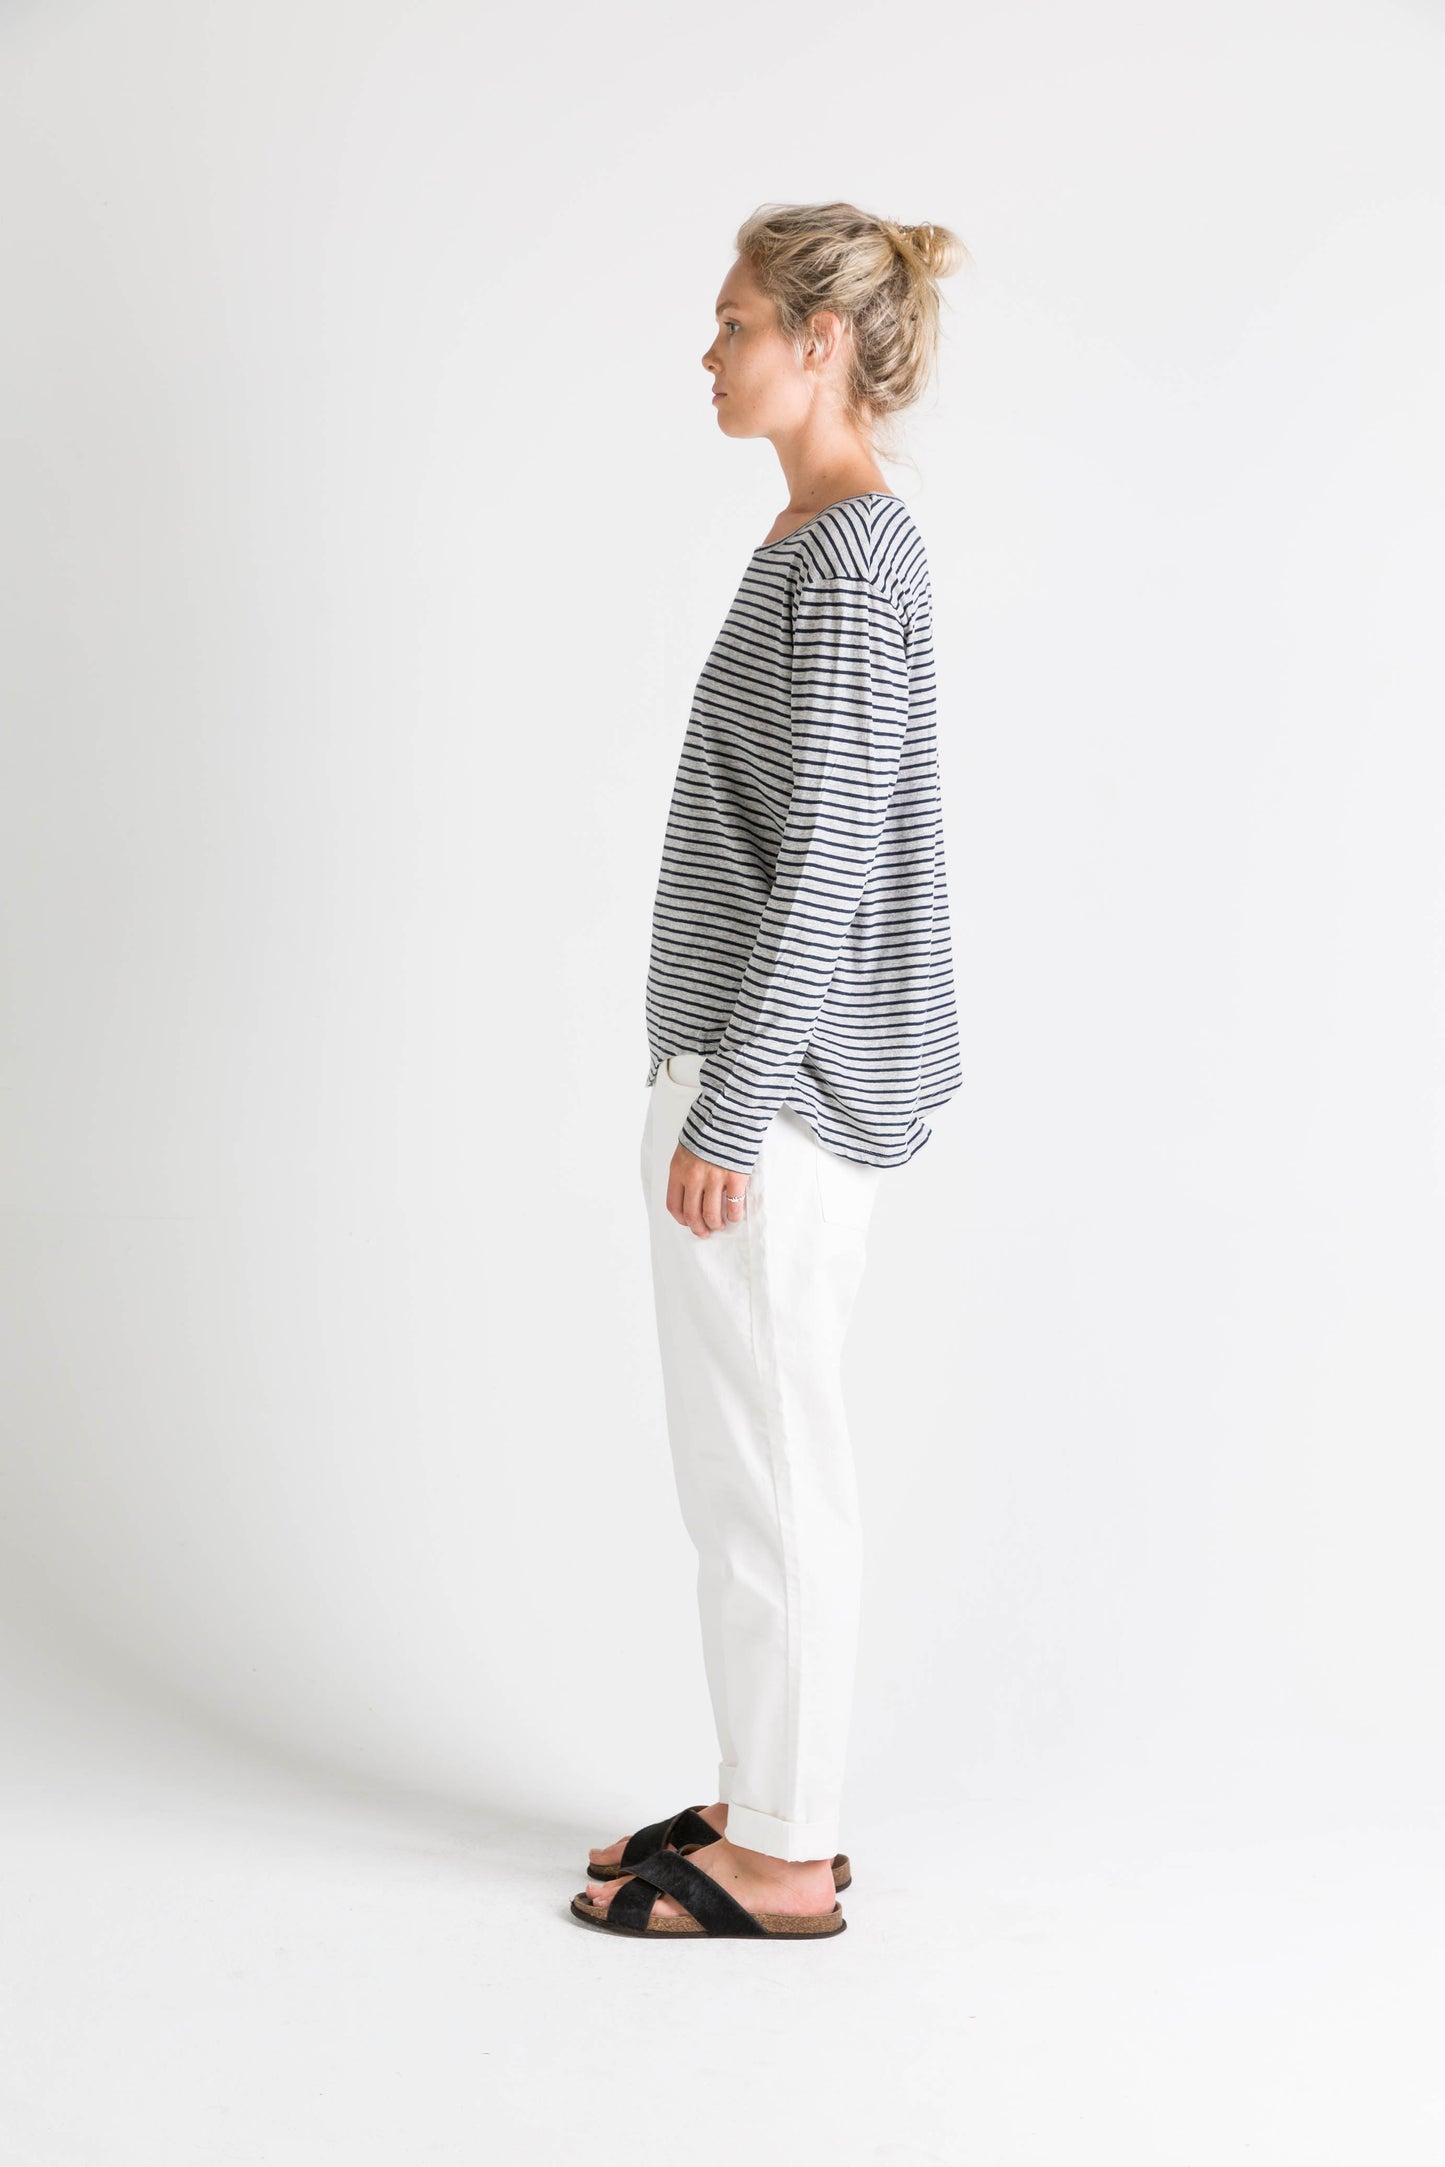 Ophelia and Ryder Long Sleeved Top